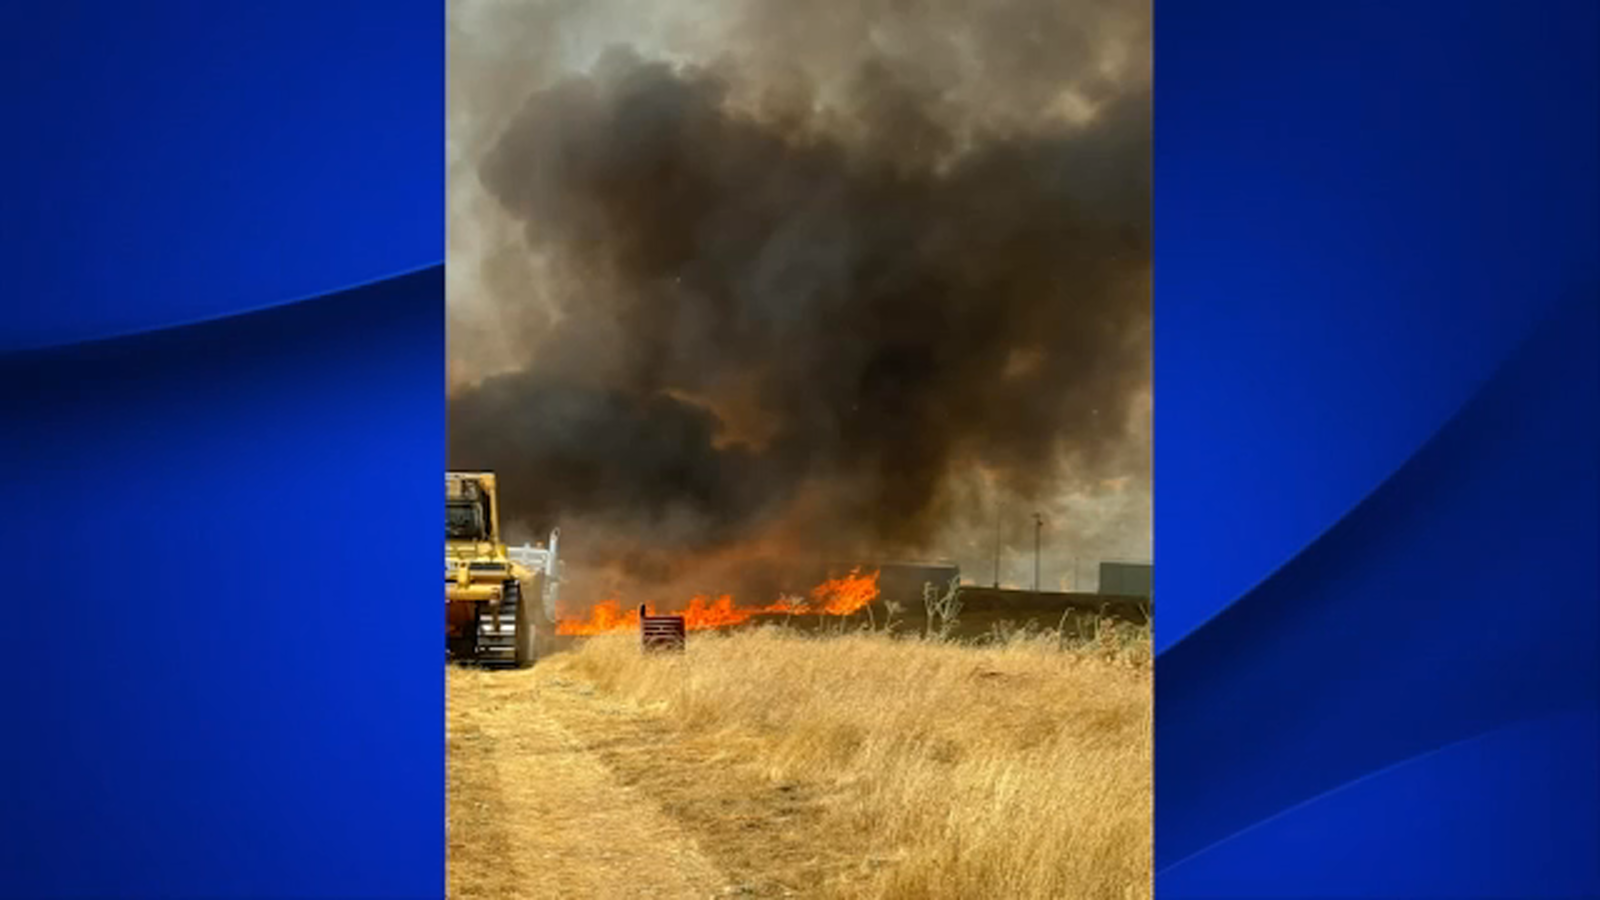 Bullion Fire destroys one home in Mariposa County